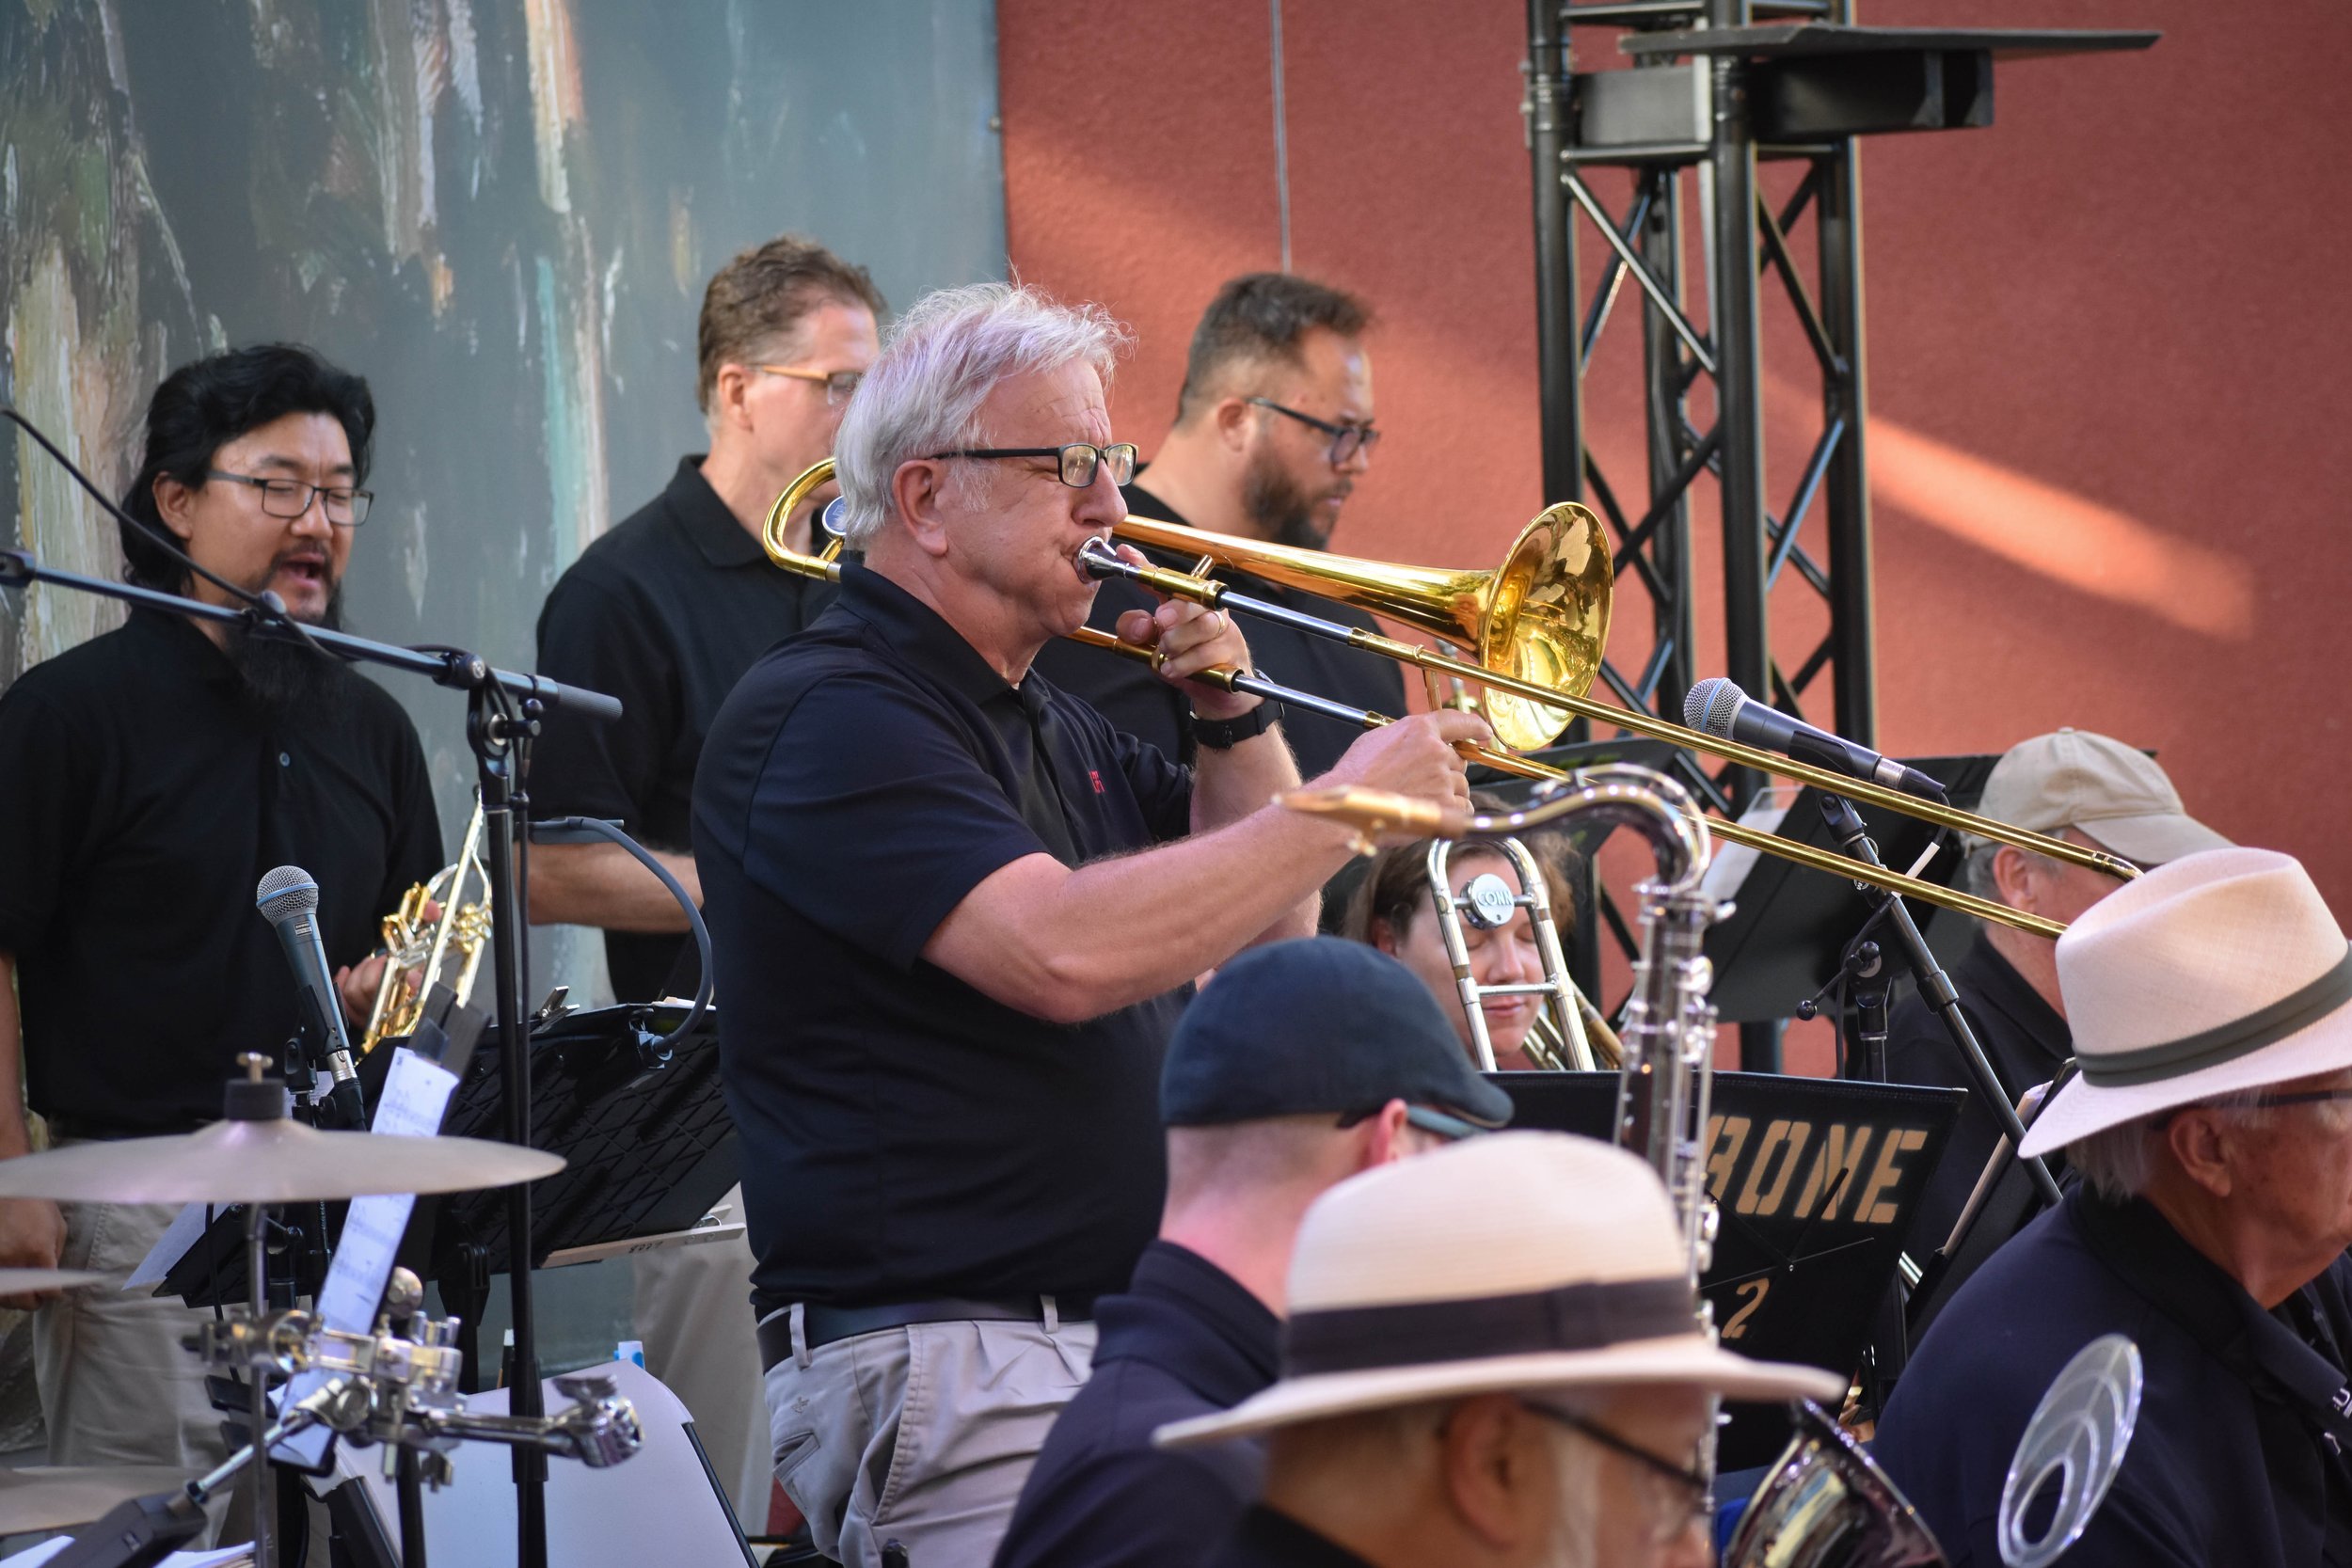 07-10-2023 Laguna Jazz Band concert at Pageant of the Masters by Peyton Webster74-61.jpg